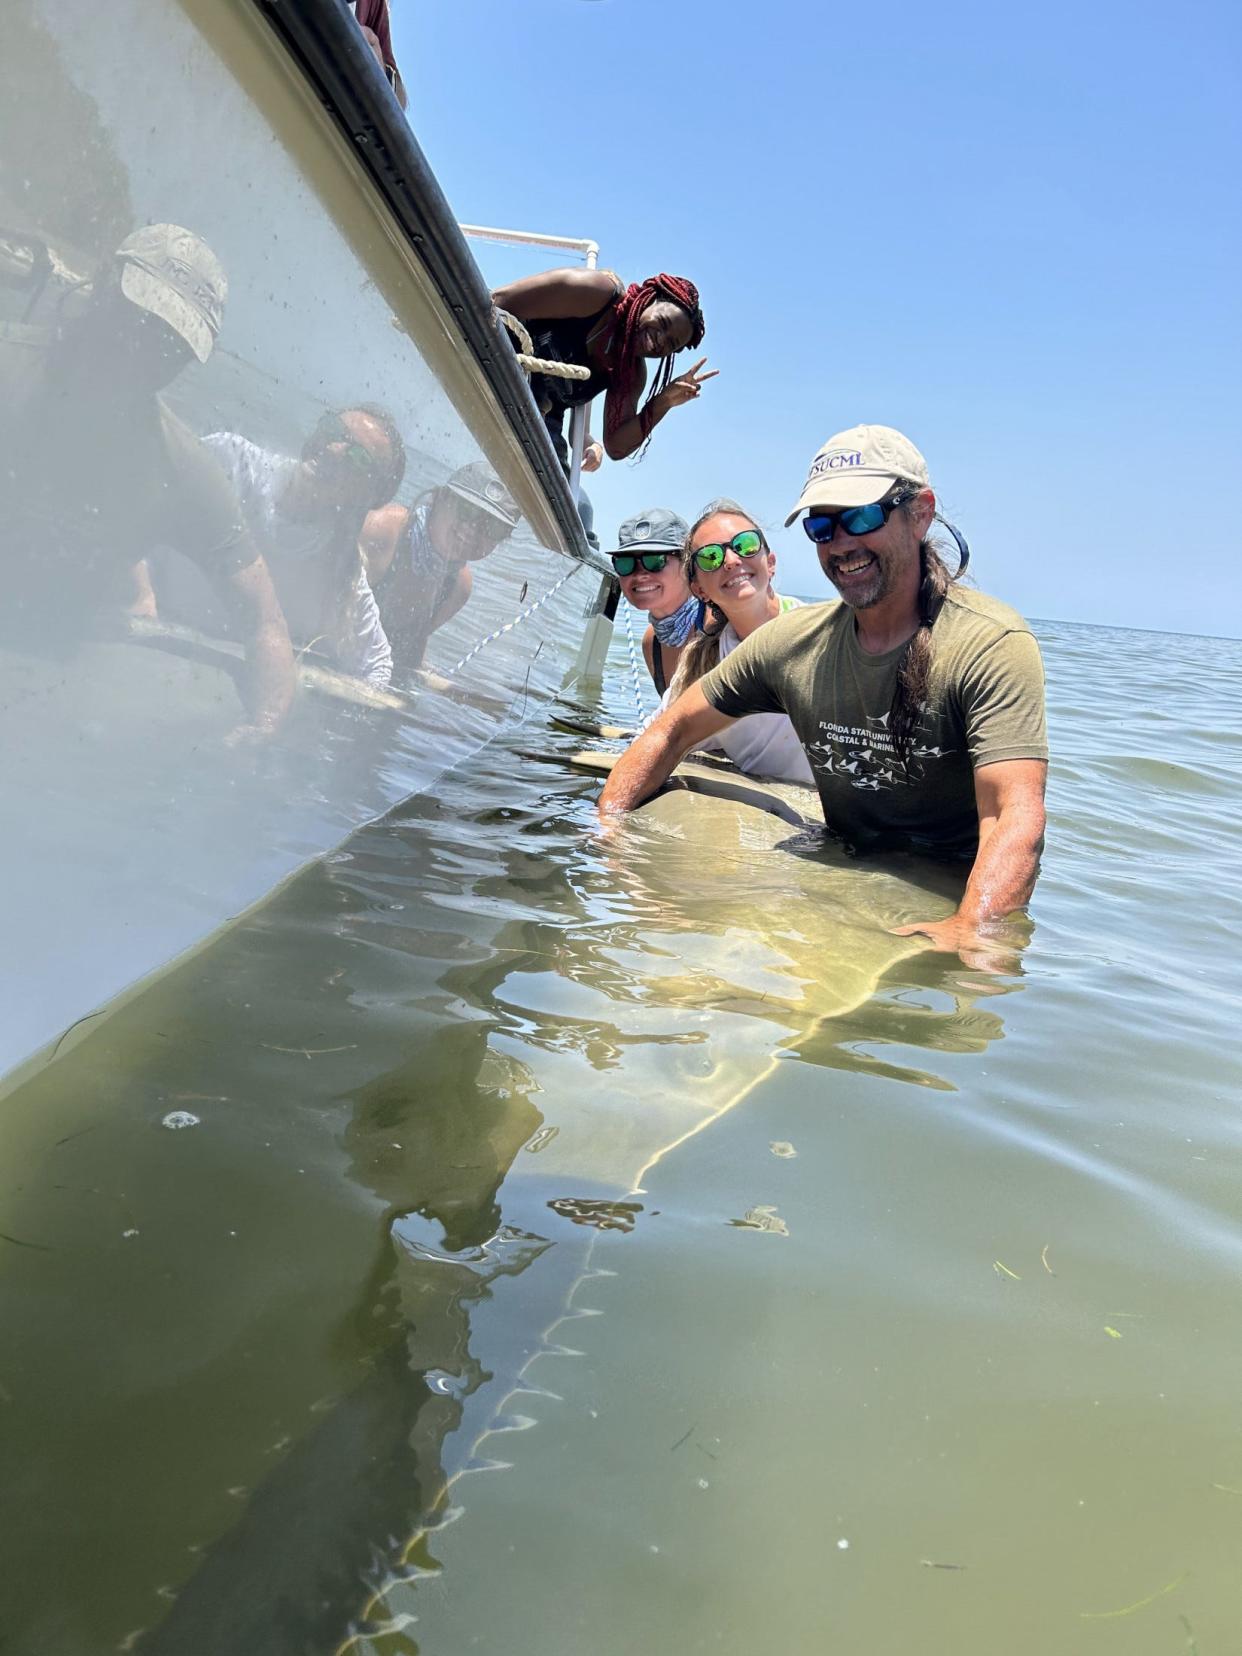 The sawfish was caught during an annual shark class co-taught by researches at Florida State University and the University of Florida.